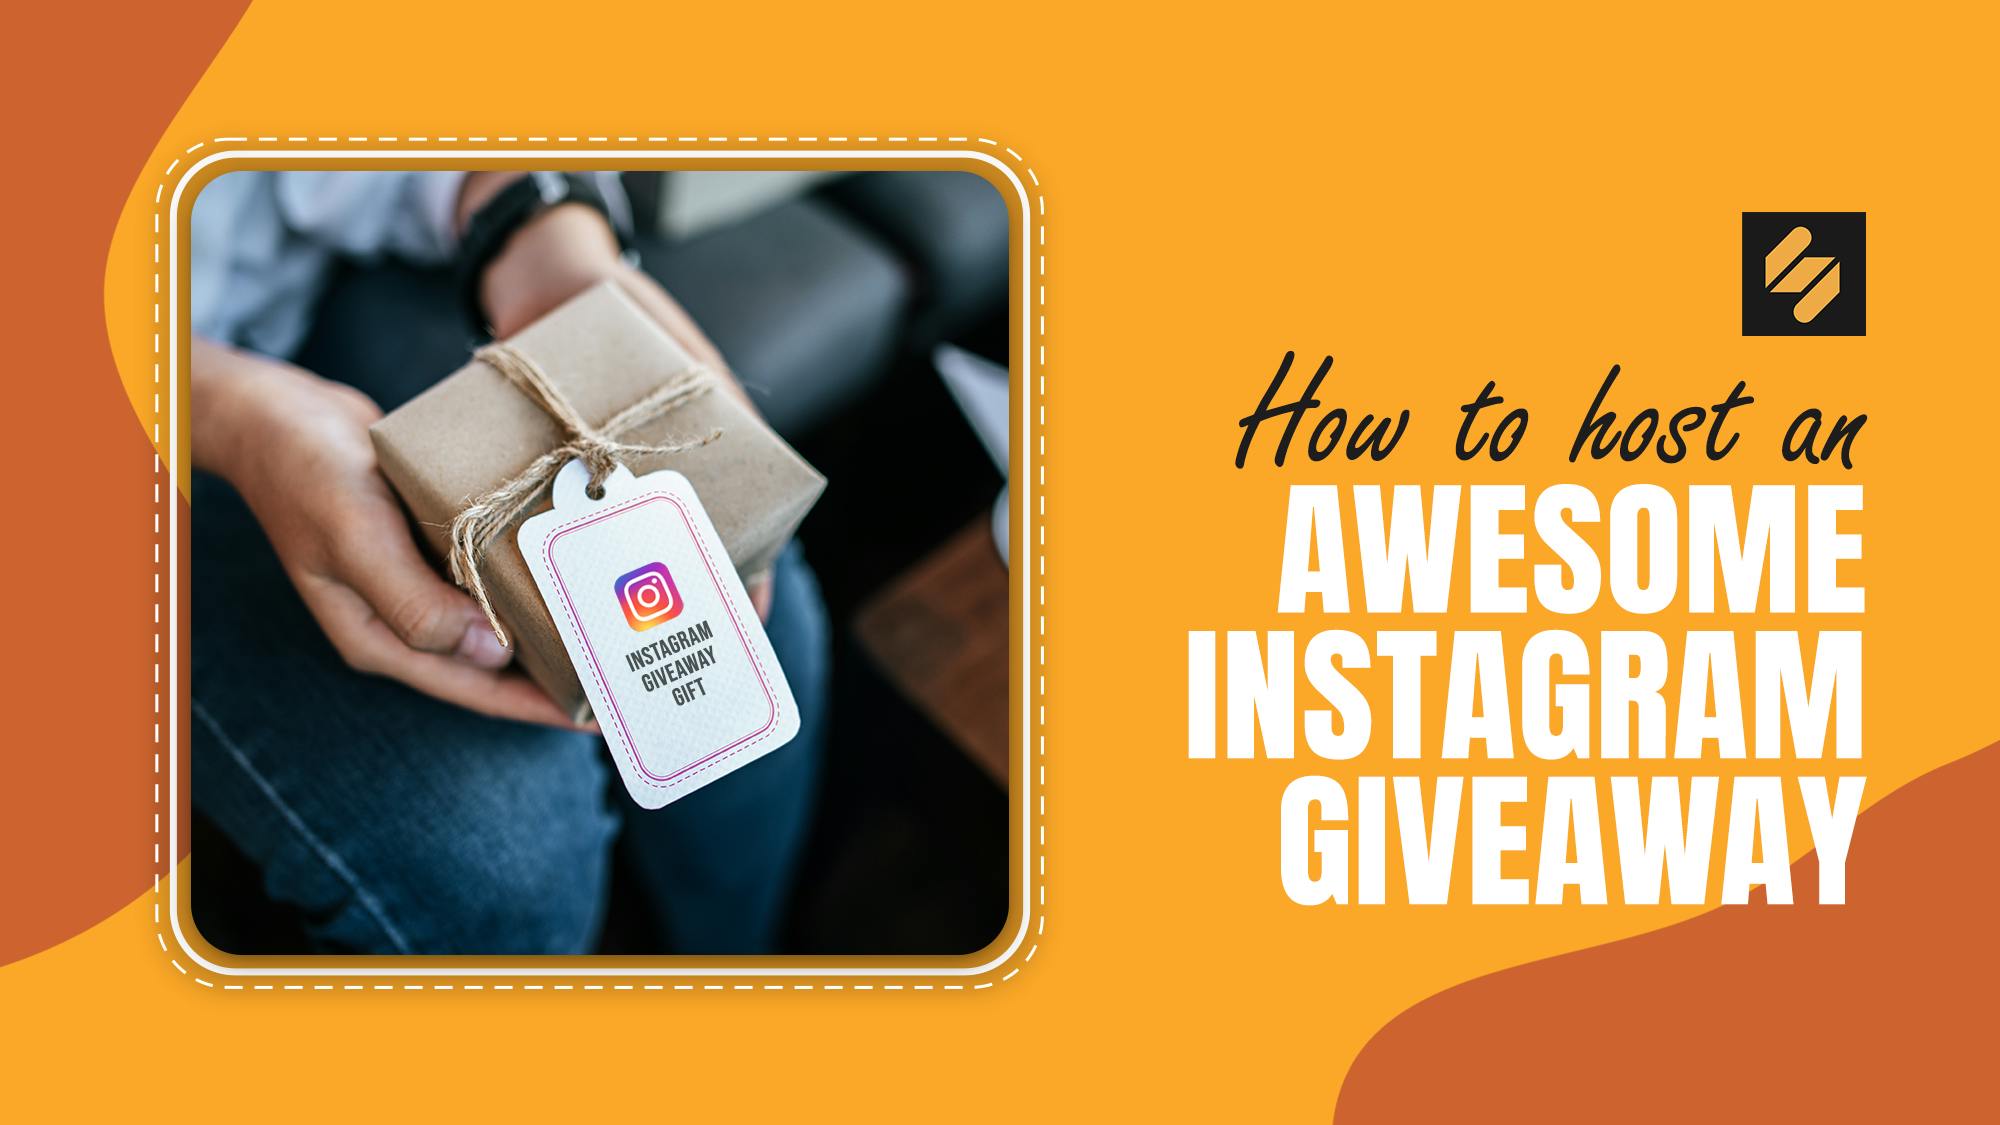 How to Host an Instagram Giveaway